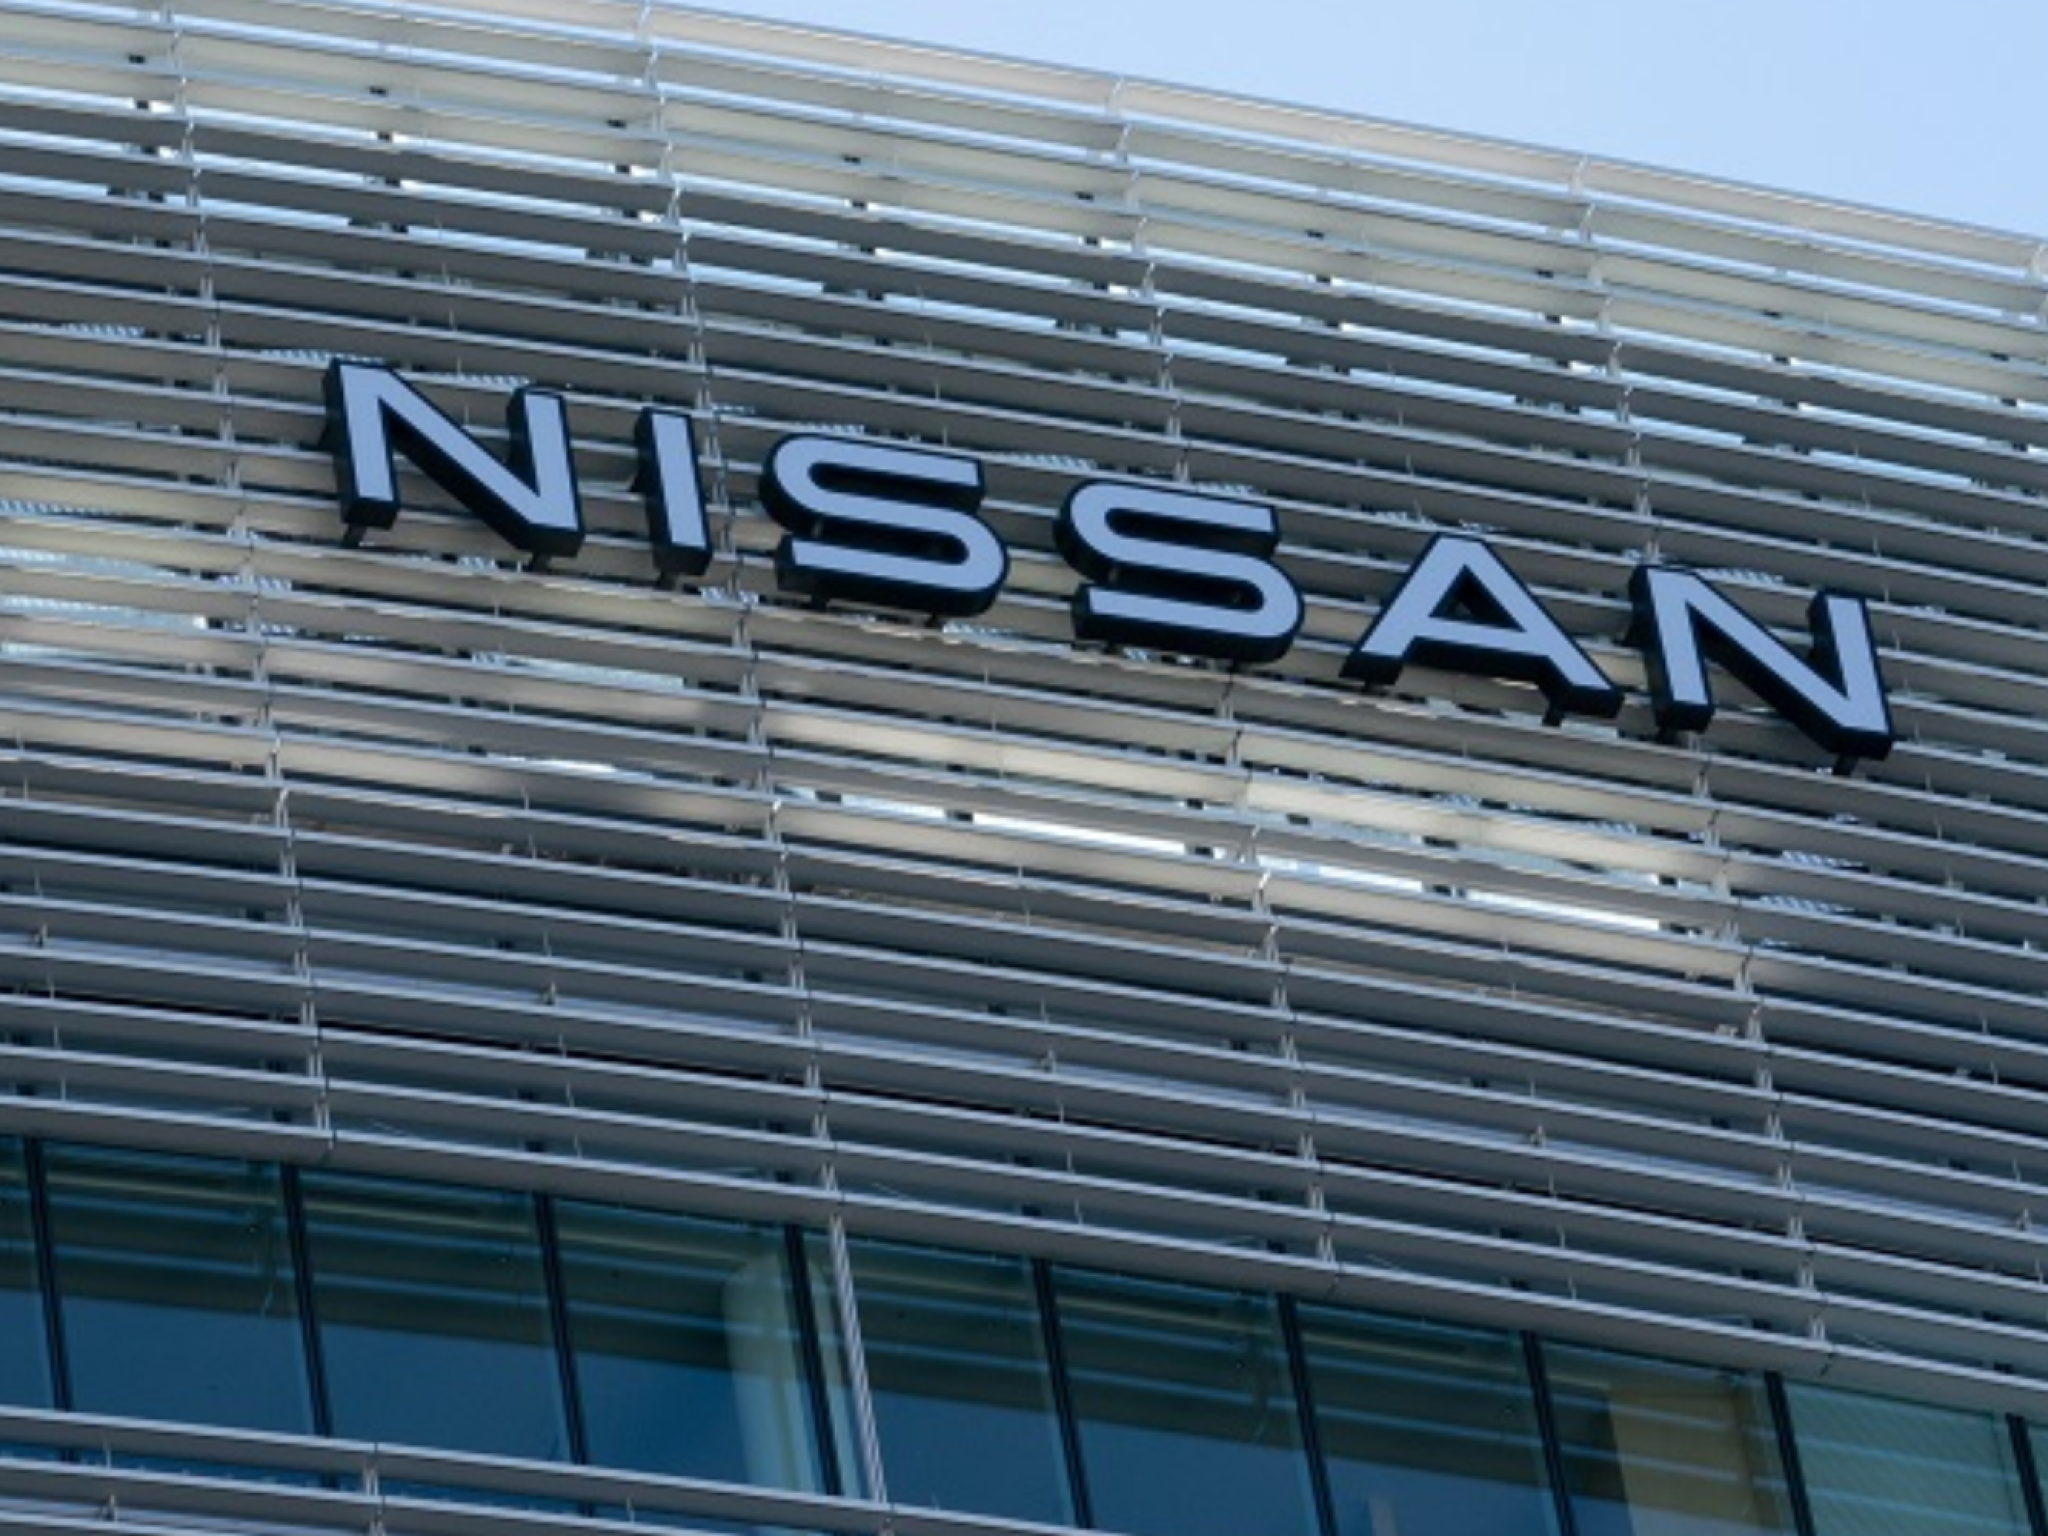  nissan-reveals-executive-committee-changes-to-accelerate-next-progress 